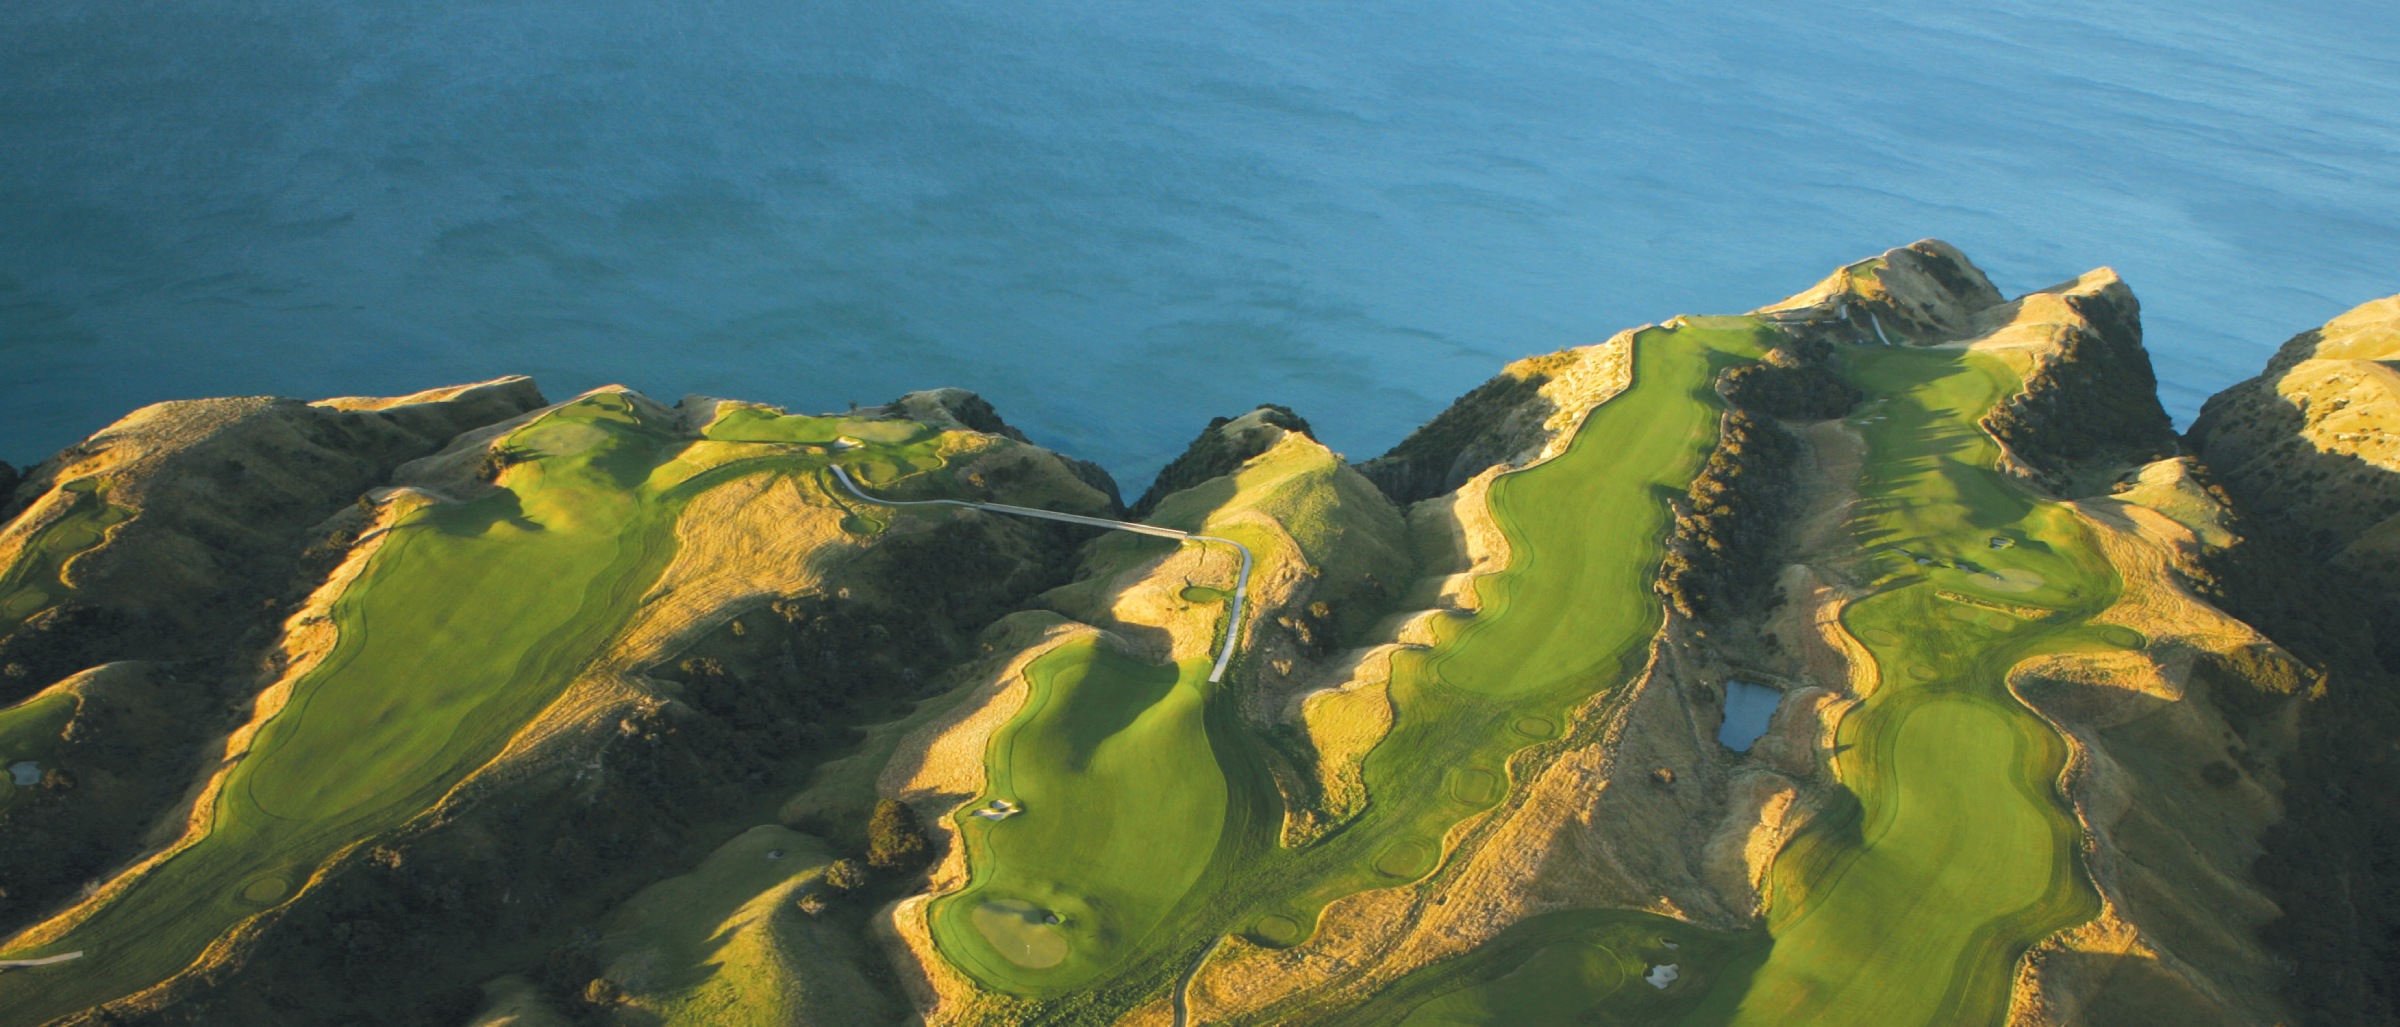 Dramatic Cape Kidnappers Golf Course, New Zealand